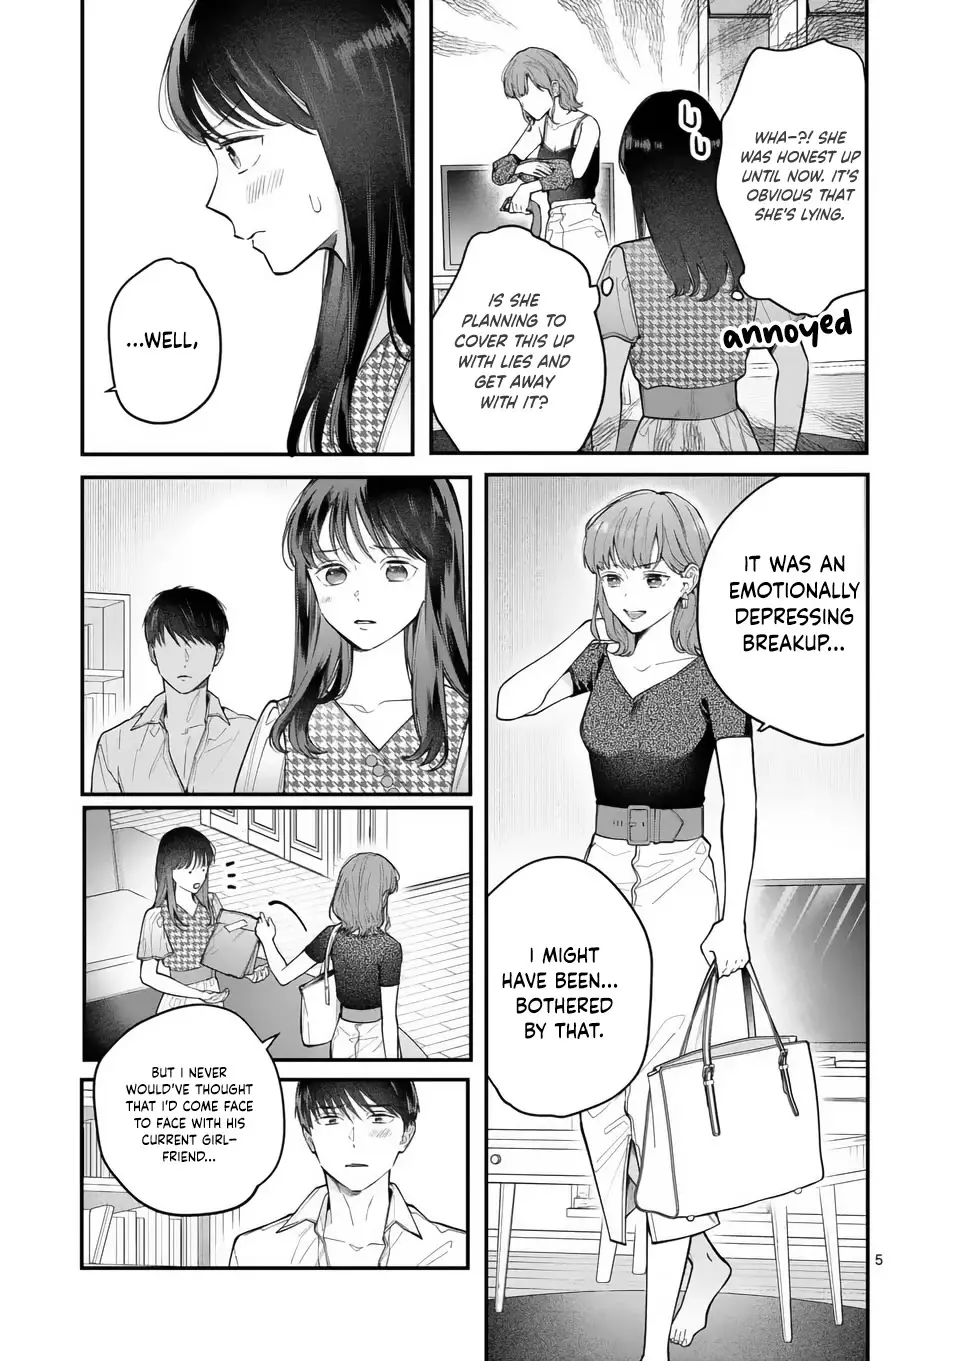 Is It Wrong To Get Done By A Girl? - 10 page 6